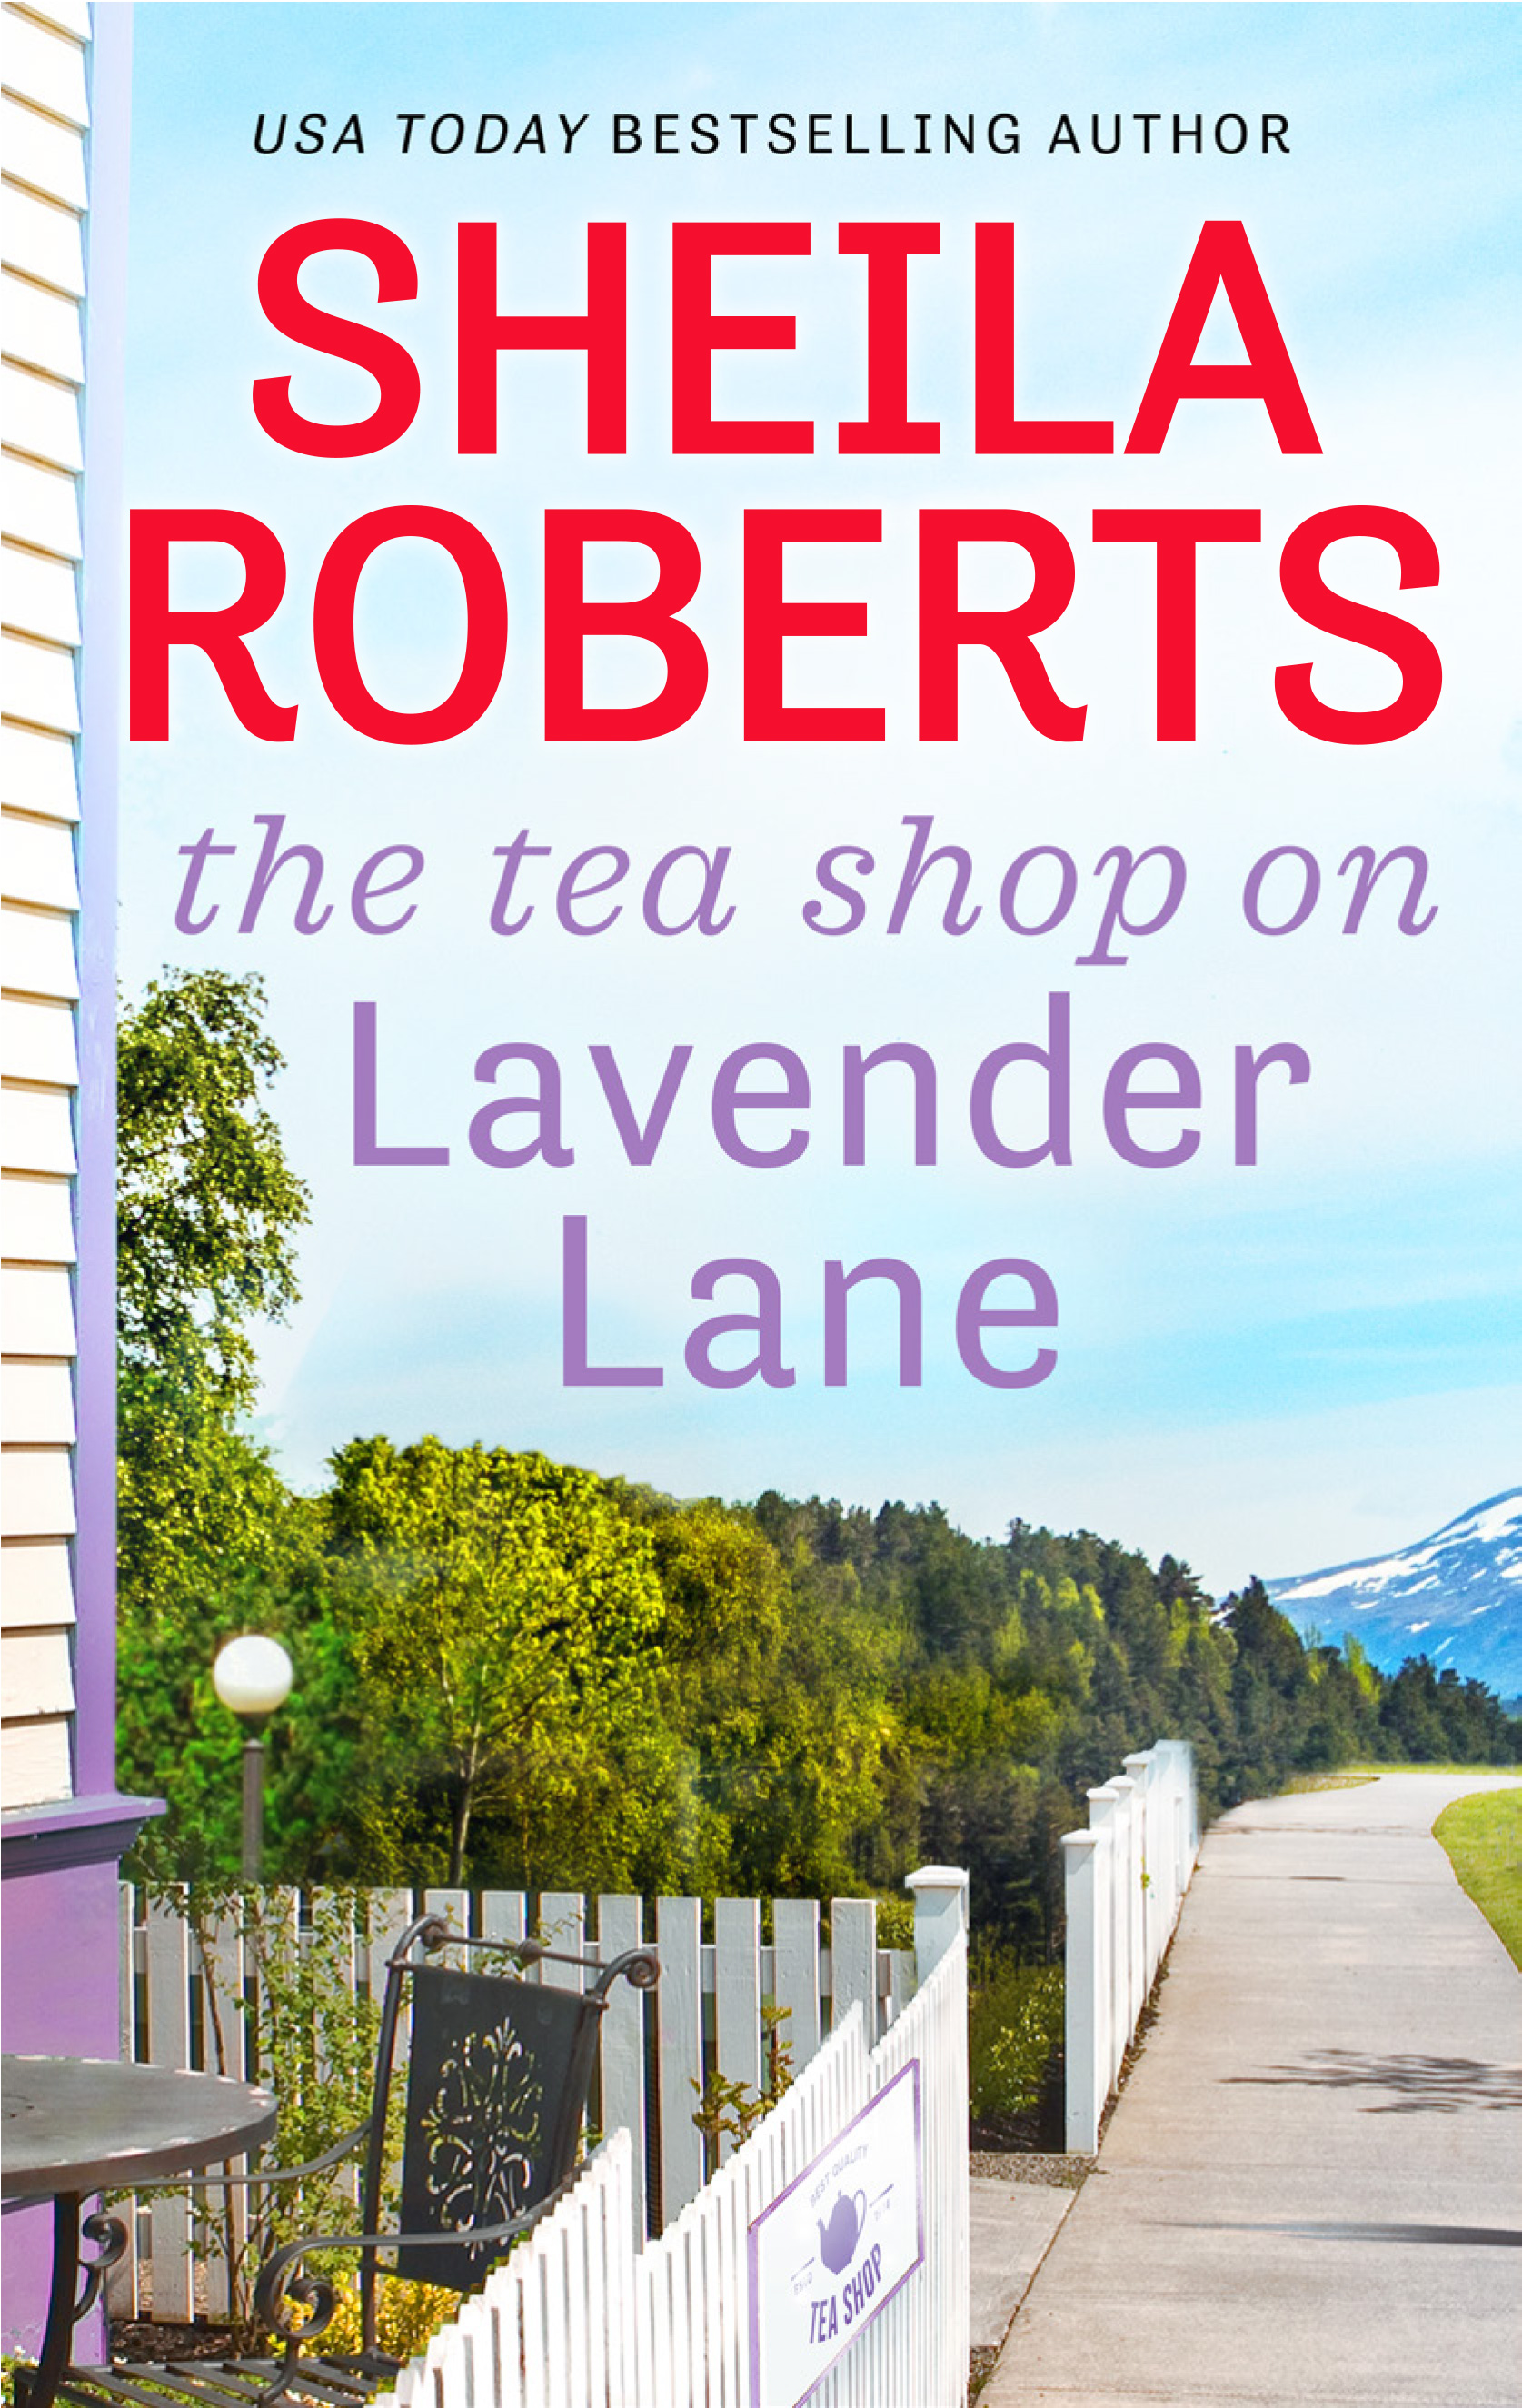 Cover Image of The Tea Shop on Lavender Lane